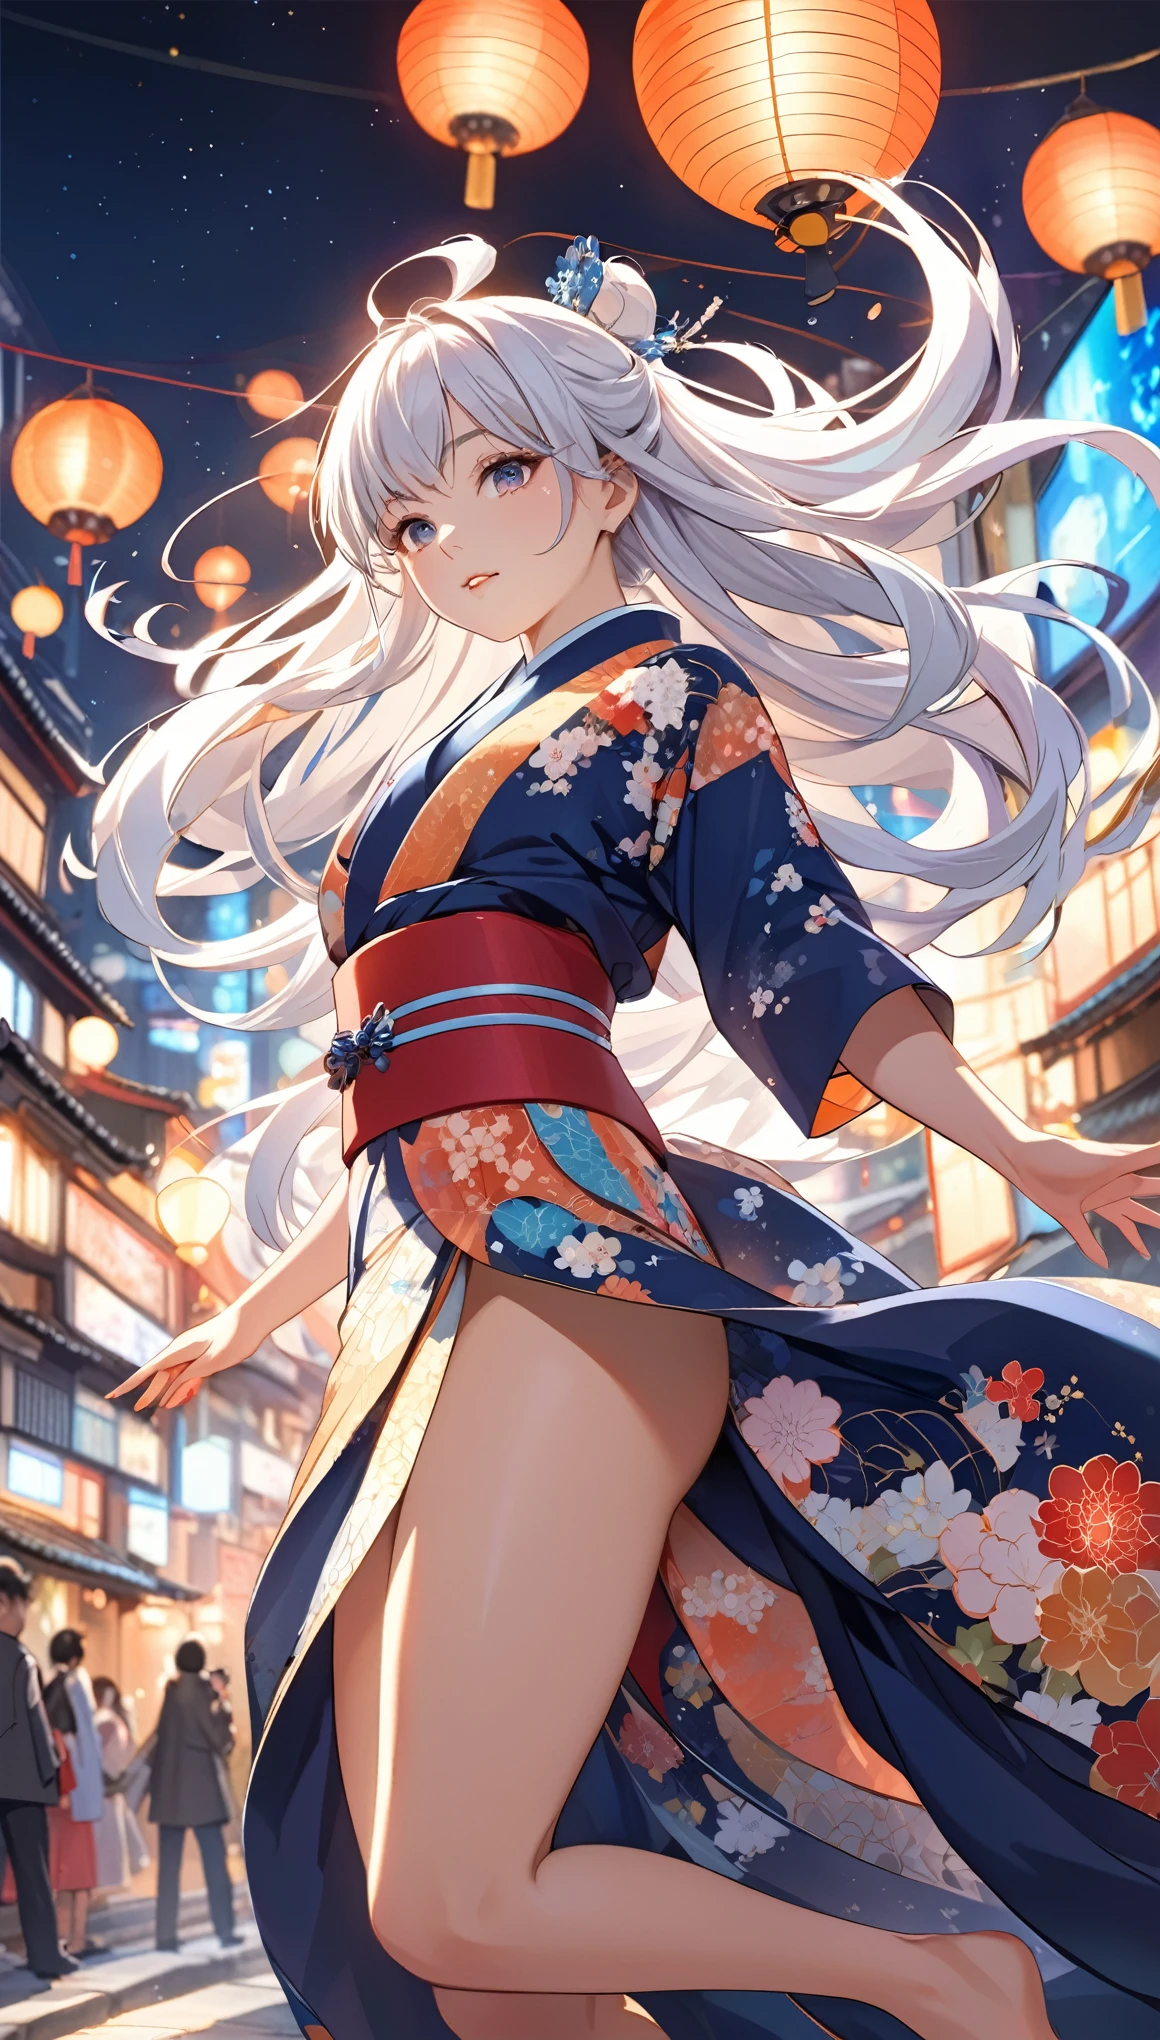 Illustrate a new portrayal of an anime girl with an immaculate hourglass figure, white hair, and brown Japanese skin, presenting herself in another unique, dynamic pose. She is adorned in a kimono, which is elegantly designed to accentuate her curves and golden ratio physique. The kimono is detailed with a pattern that signifies growth and progress, adding layers of depth to her character. Her eyes are a focal point, rendered in exceptional detail to convey depth, intelligence, and emotion. The backdrop is an intricately detailed night scene of a Japanese city, vibrant with the energy and lights of urban life. This masterpiece should encapsulate the entire scene, focusing on the anime girl's beauty, the complexity of her attire, and the bustling city environment. The image is crafted to celebrate the fusion of traditional beauty and modern dynamism, showcasing the anime girl in a fresh and vibrant pose against the nocturnal backdrop of Japan.